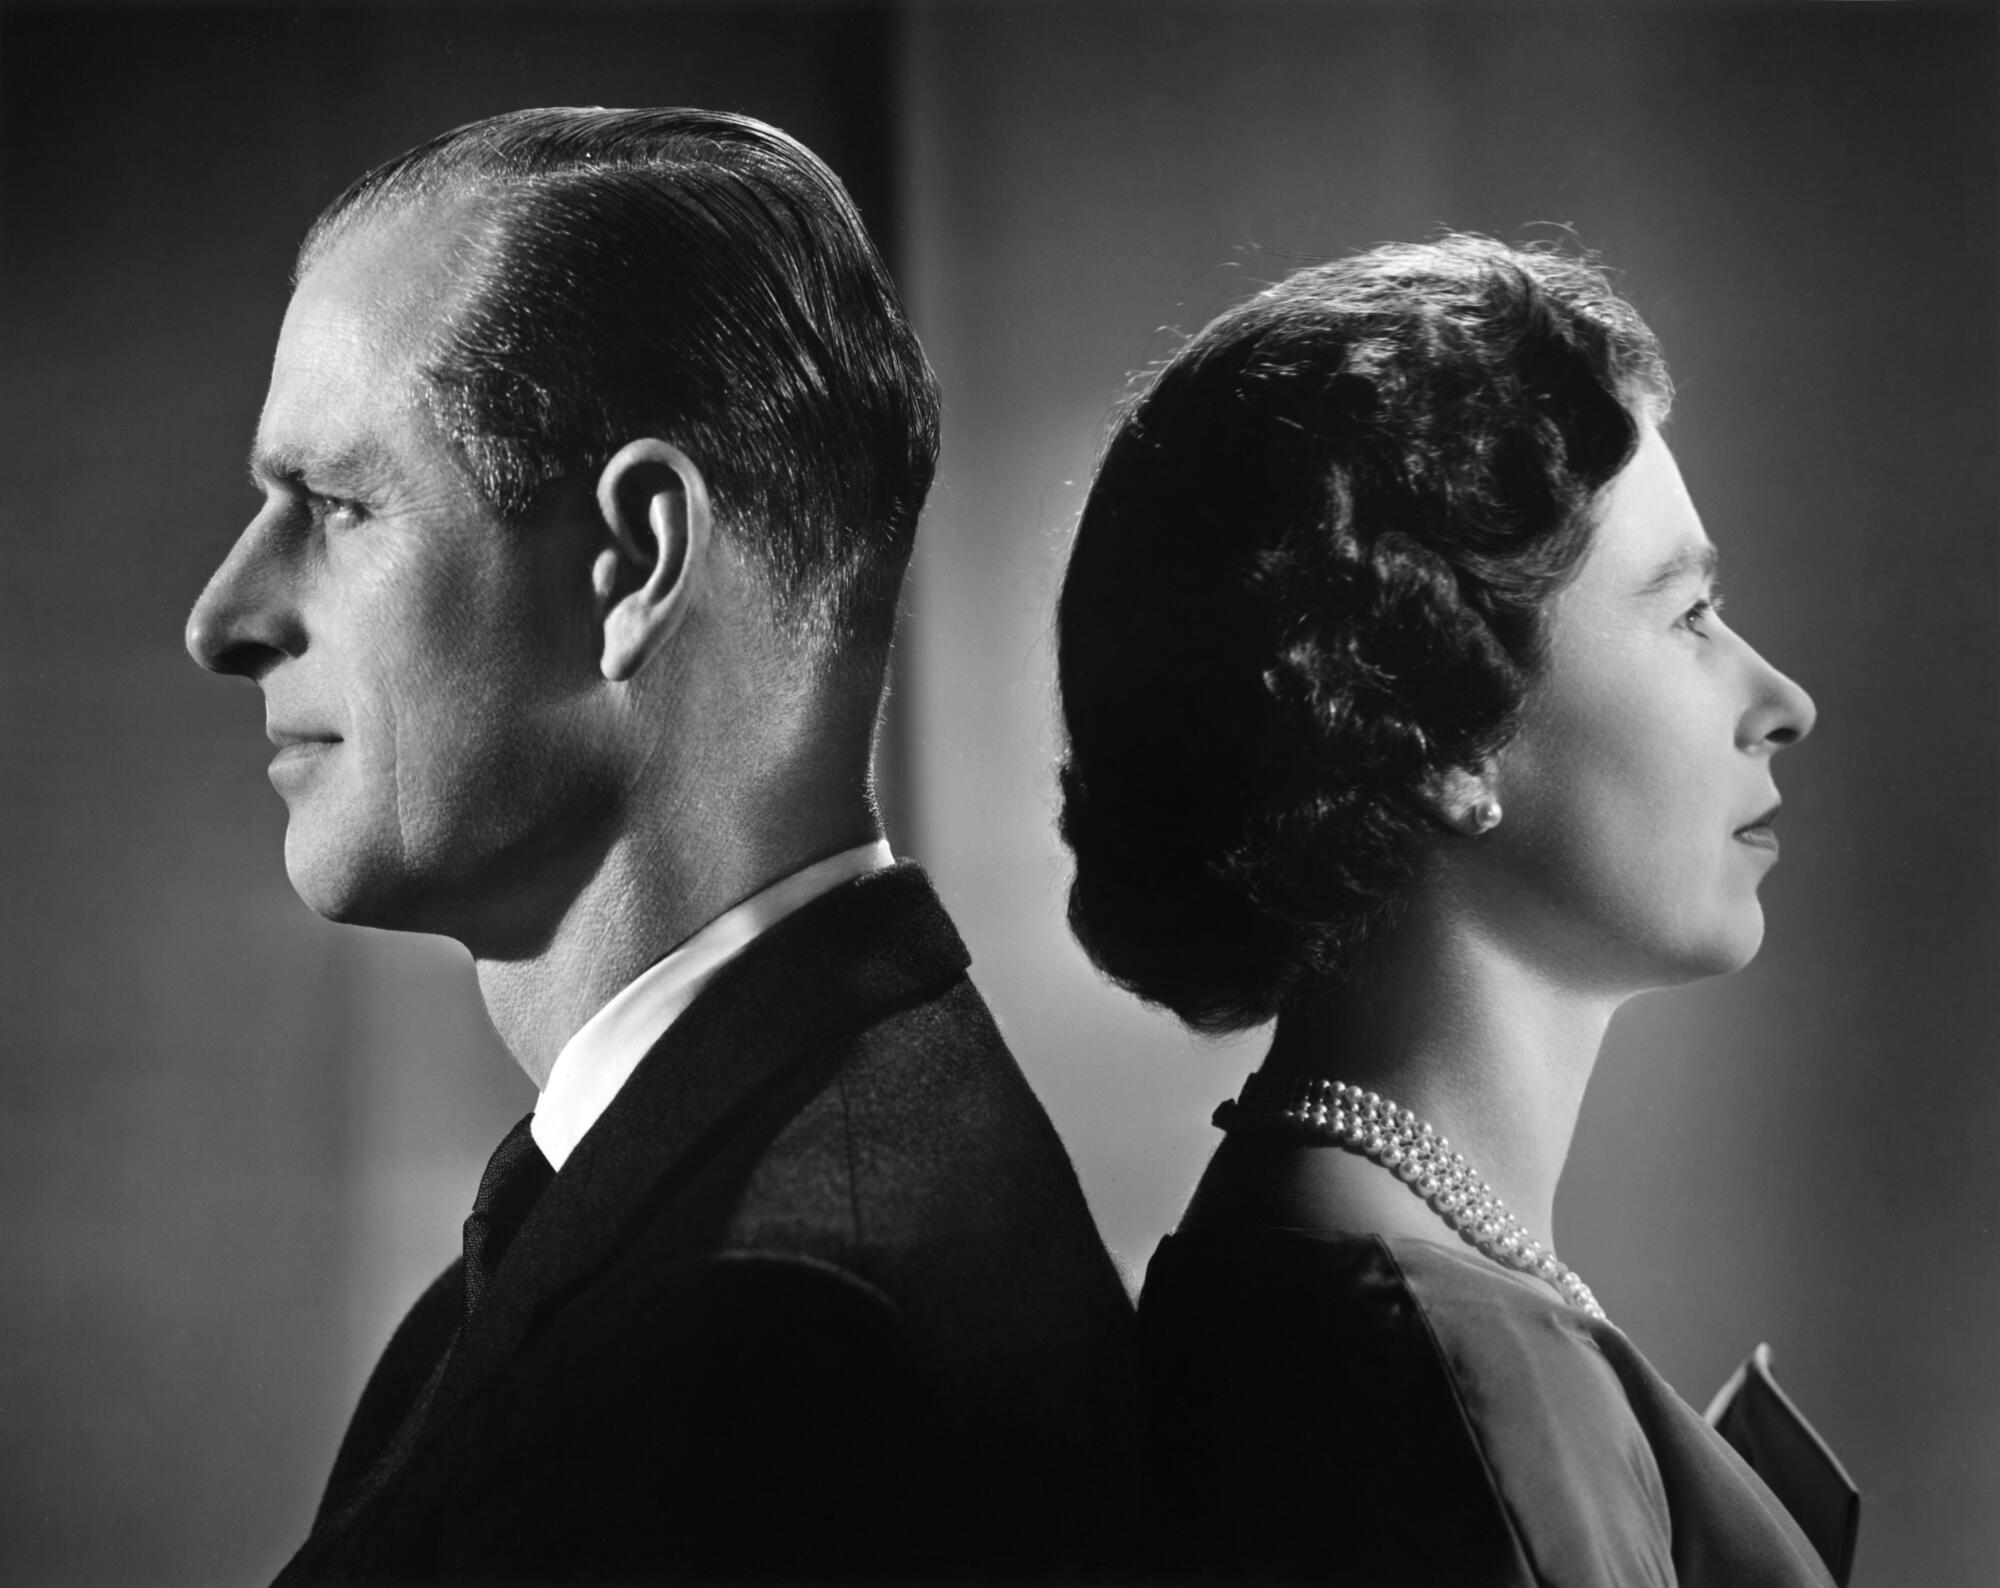 Queen Elizabeth II and Prince Philip stand back-to-back in a 1958 portrait